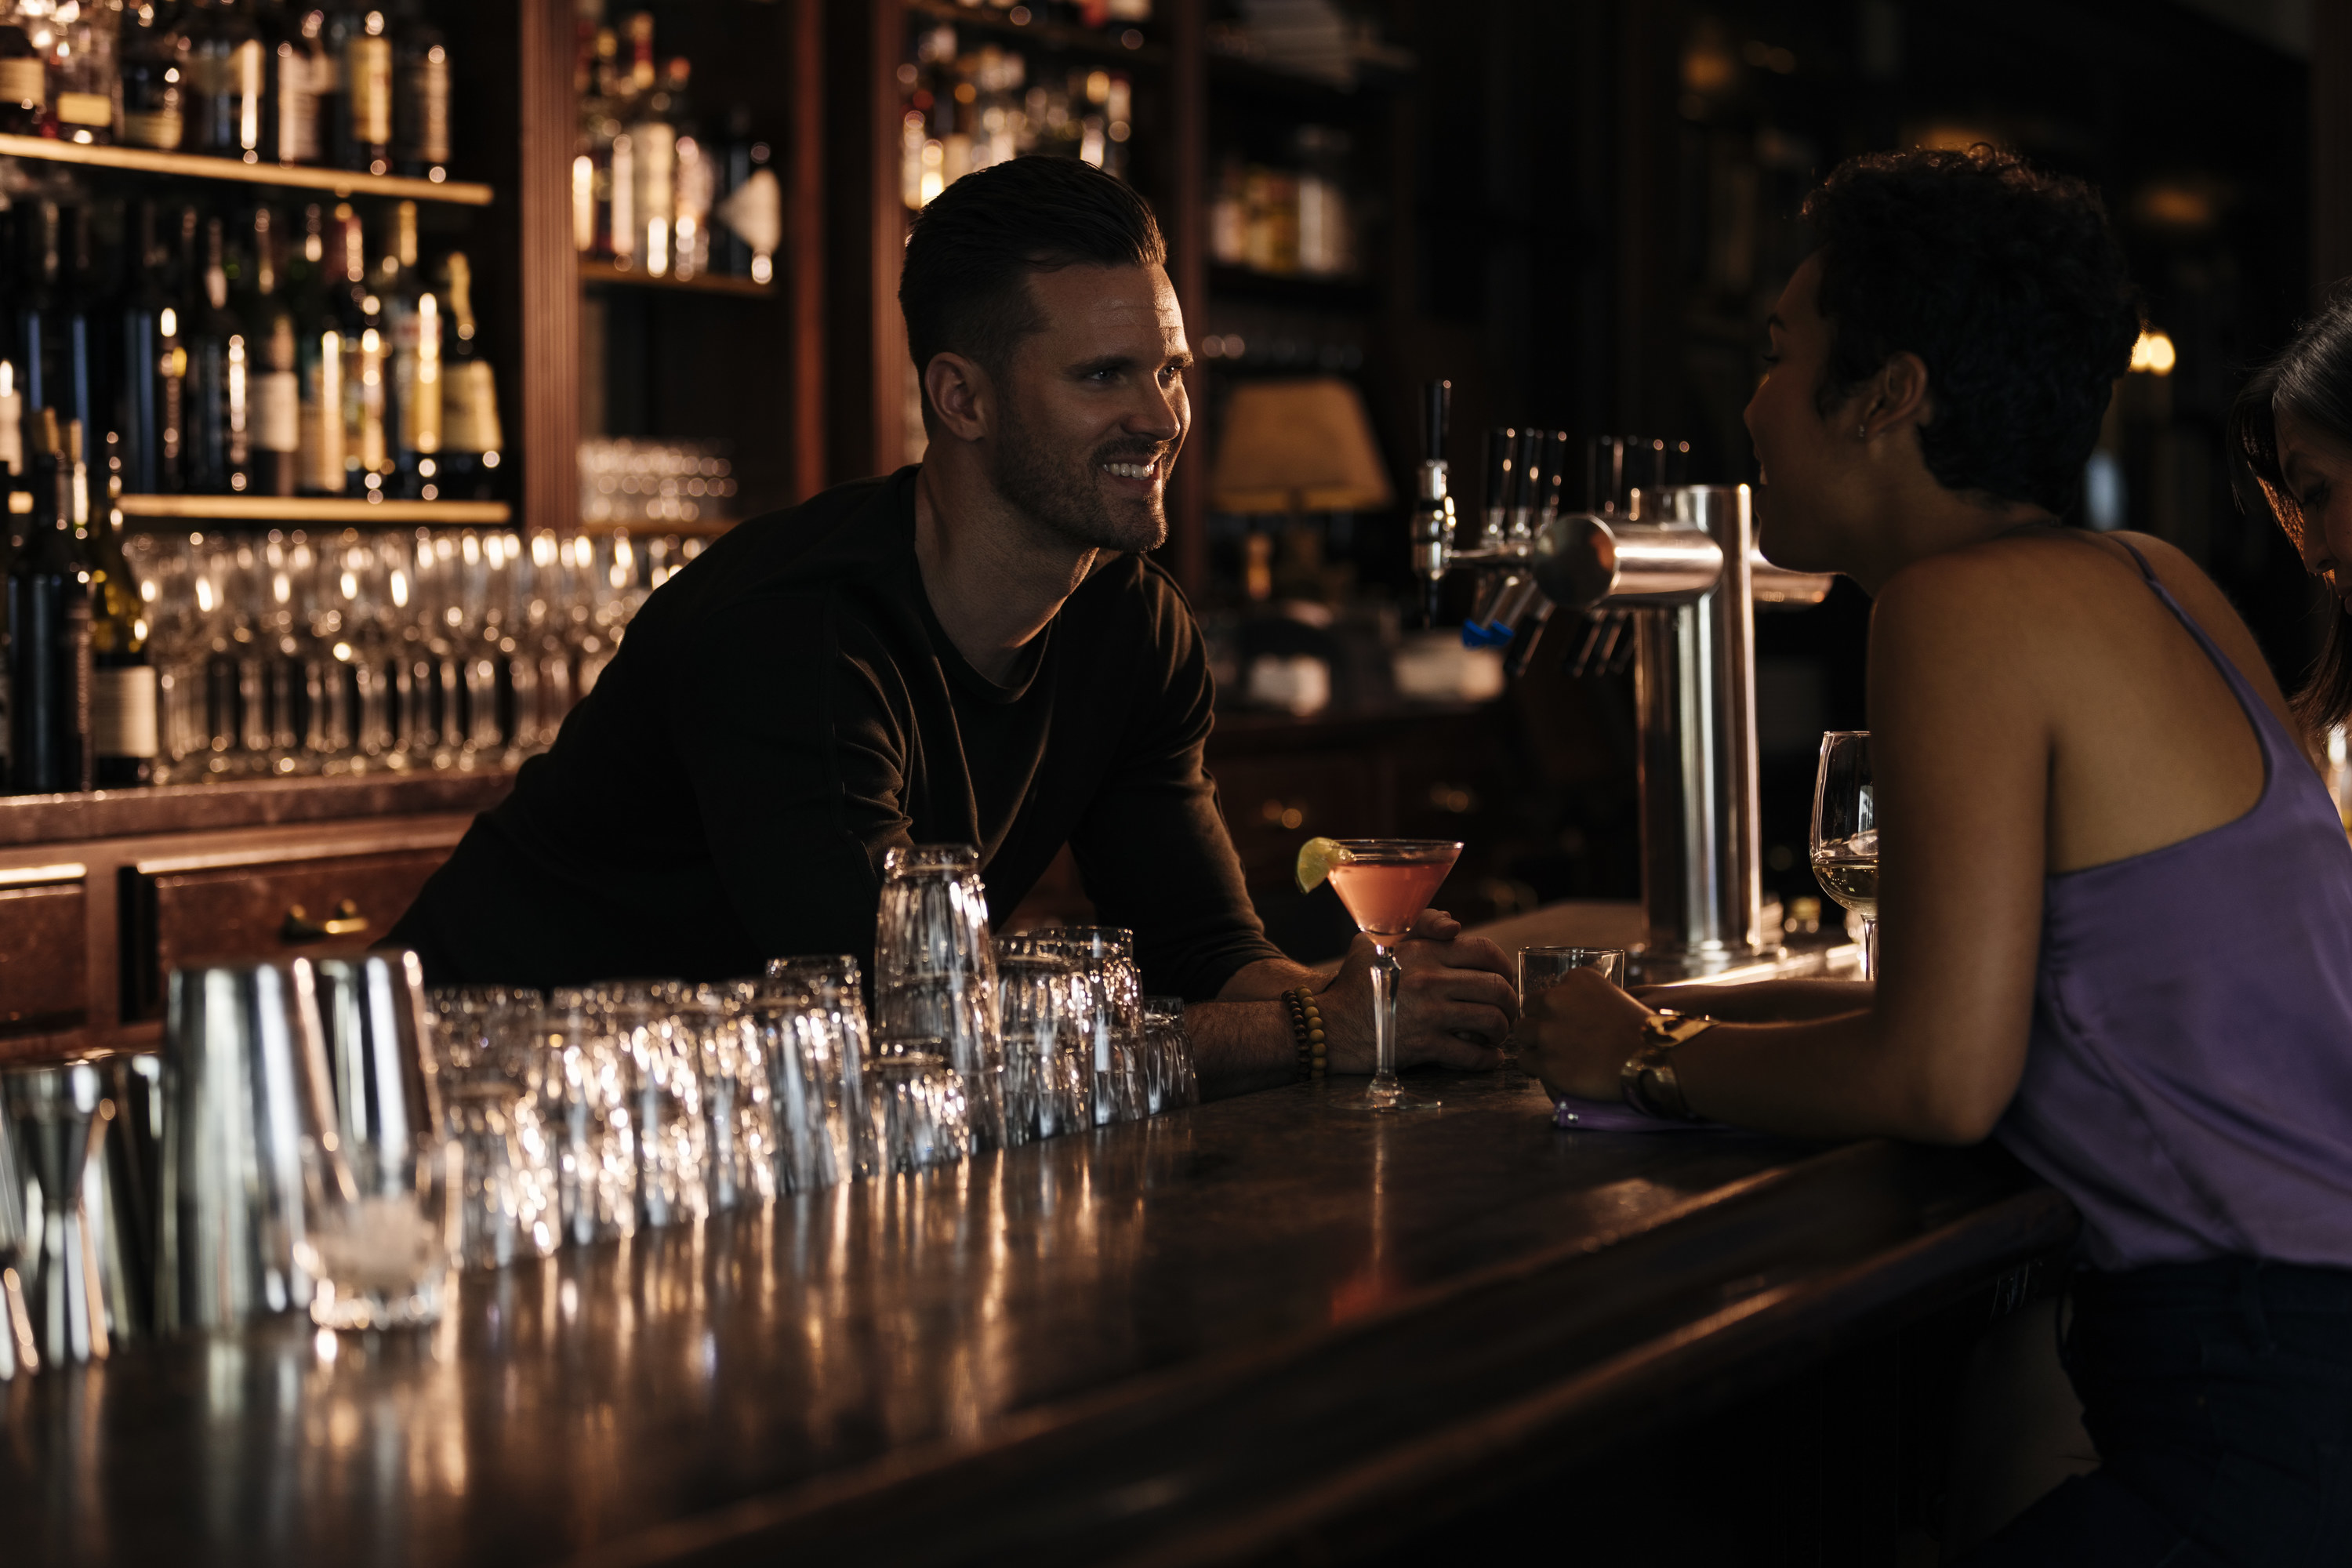 A bartender talking to a woman at a dimly lit bar